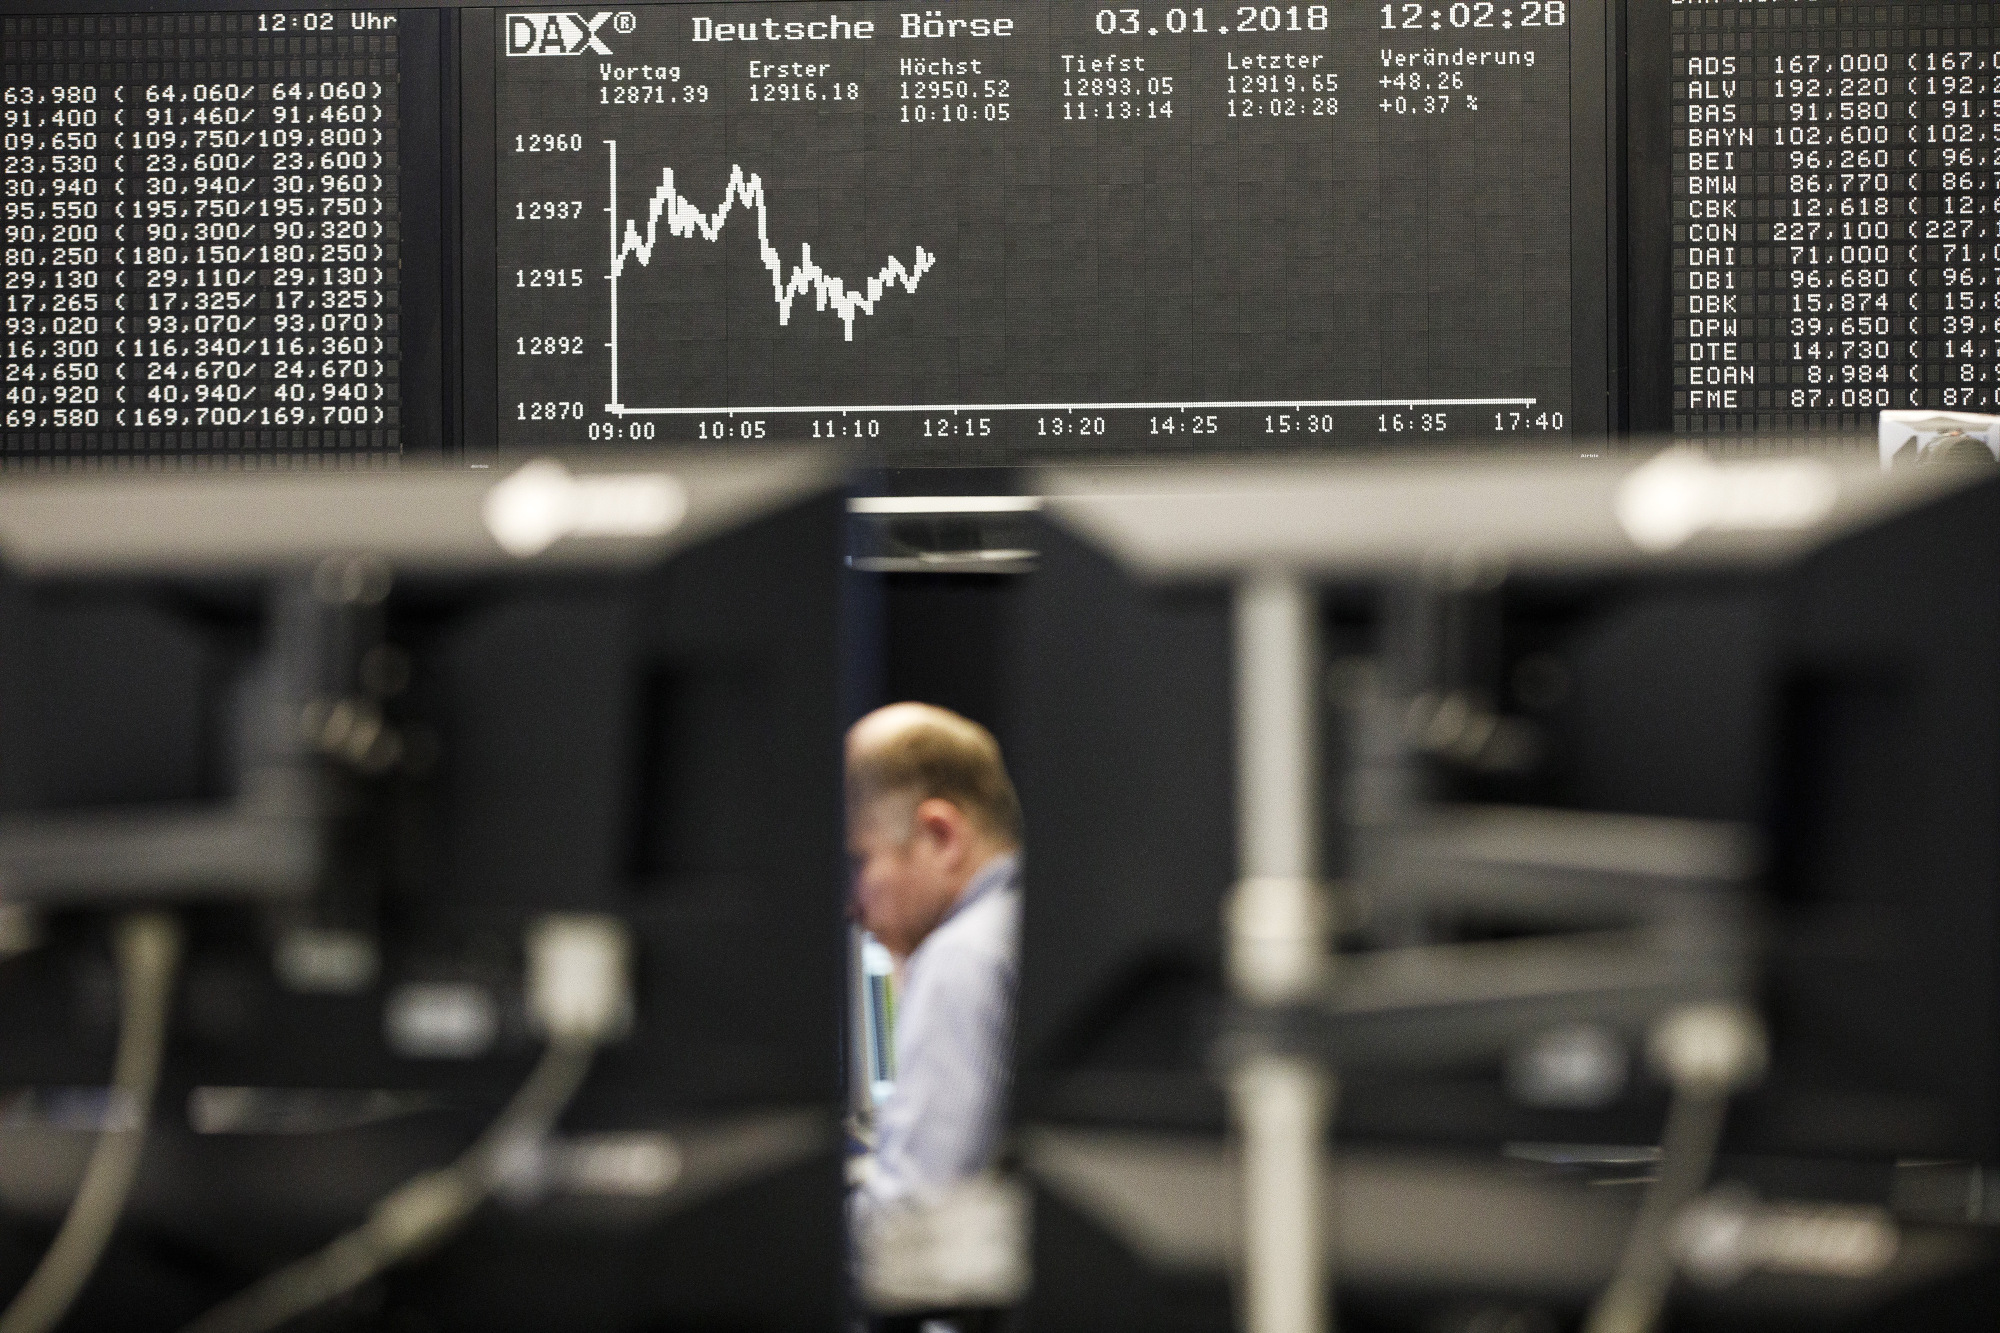 Traders monitor financial data as the second iteration of the Markets in Financial Instruments Directive (MiFID II) comes into force, as the DAX Index curve is displayed beyond at the Frankfurt Stock Exchange, operated by Deutsche Boerse AG, in Frankfurt, Germany, on Wednesday, Jan. 3, 2018.